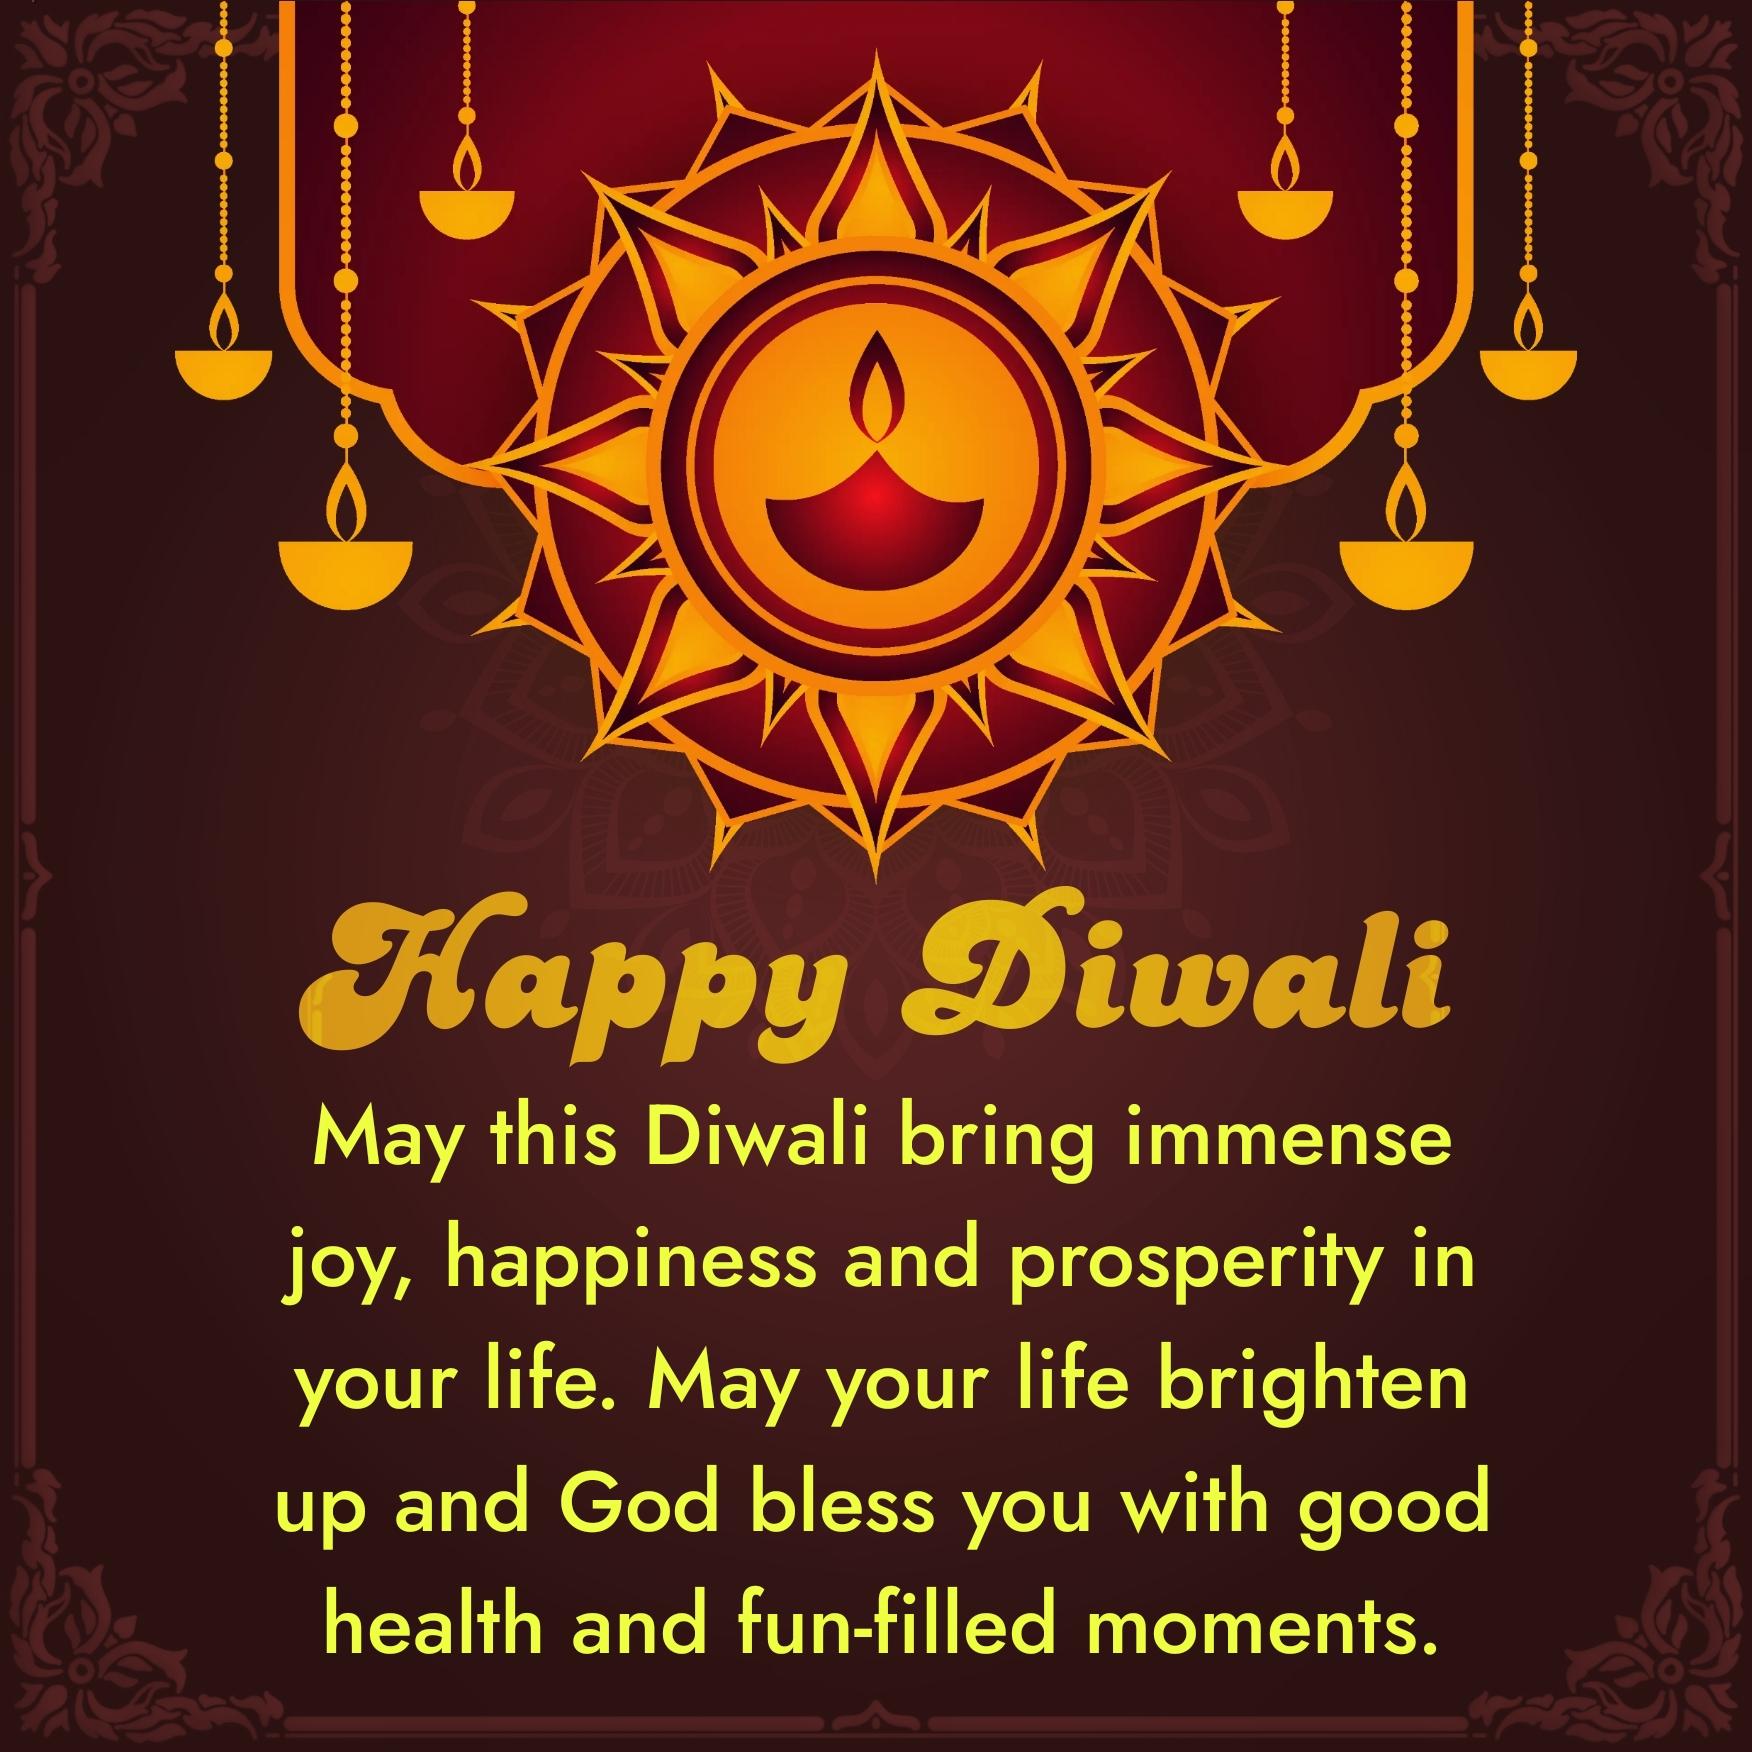 May this Diwali bring immense joy happiness and prosperity